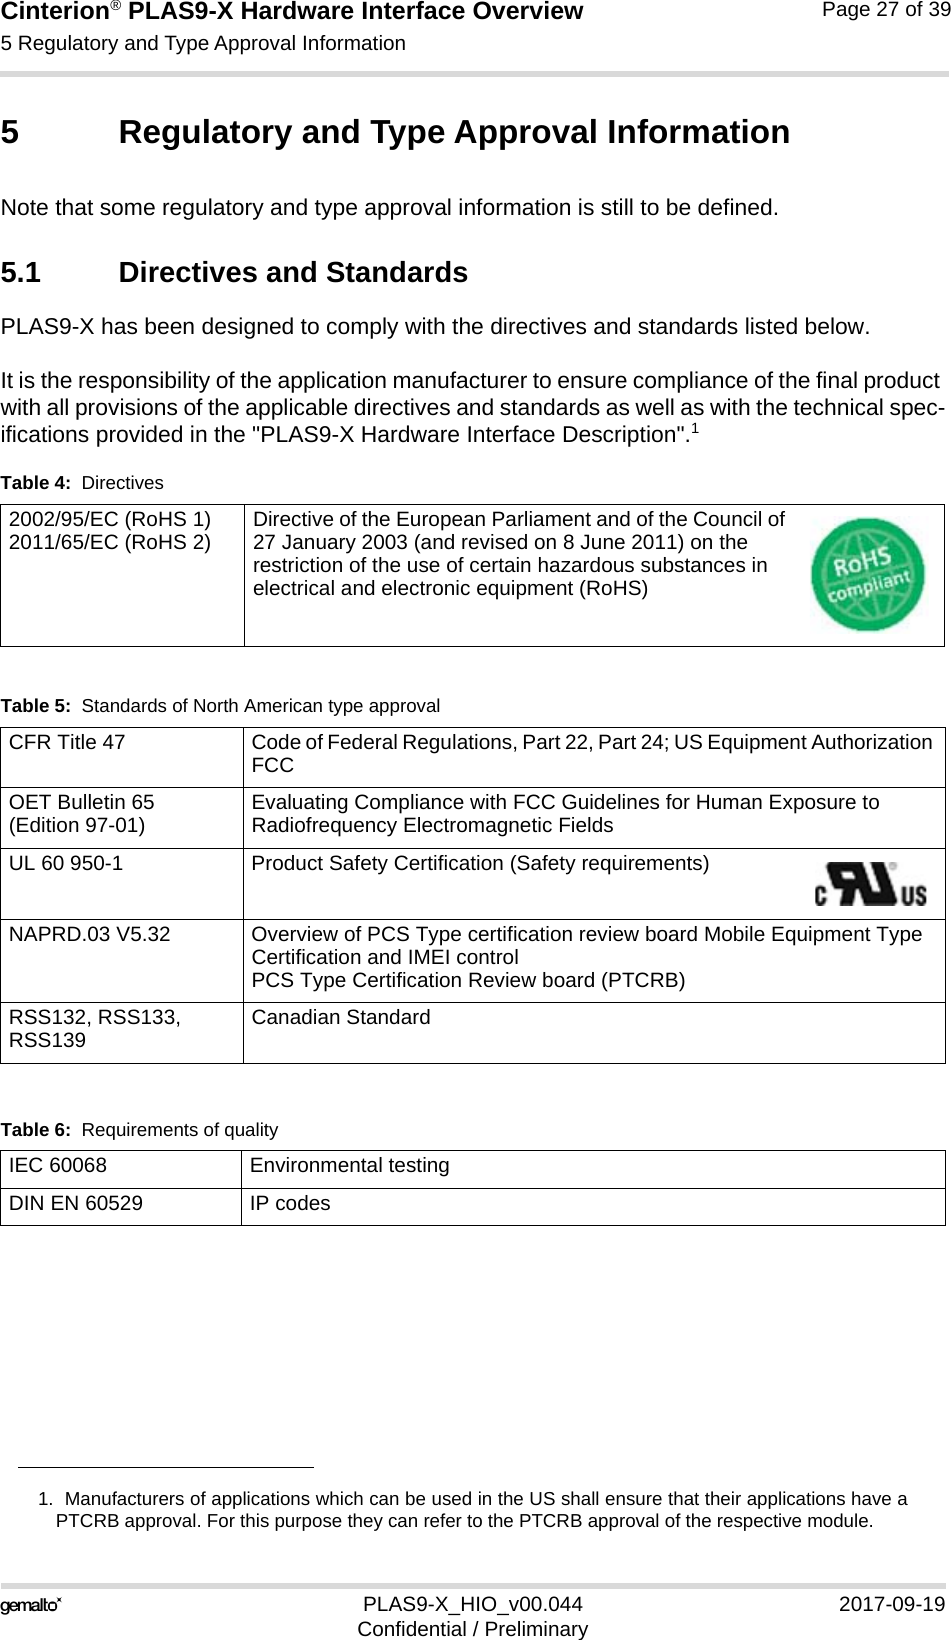 Cinterion® PLAS9-X Hardware Interface Overview5 Regulatory and Type Approval Information32PLAS9-X_HIO_v00.044 2017-09-19Confidential / PreliminaryPage 27 of 395 Regulatory and Type Approval InformationNote that some regulatory and type approval information is still to be defined. 5.1 Directives and StandardsPLAS9-X has been designed to comply with the directives and standards listed below.It is the responsibility of the application manufacturer to ensure compliance of the final product with all provisions of the applicable directives and standards as well as with the technical spec-ifications provided in the &quot;PLAS9-X Hardware Interface Description&quot;.11.  Manufacturers of applications which can be used in the US shall ensure that their applications have aPTCRB approval. For this purpose they can refer to the PTCRB approval of the respective module.Table 4:  Directives2002/95/EC (RoHS 1)2011/65/EC (RoHS 2) Directive of the European Parliament and of the Council of 27 January 2003 (and revised on 8 June 2011) on the restriction of the use of certain hazardous substances in electrical and electronic equipment (RoHS)Table 5:  Standards of North American type approvalCFR Title 47 Code of Federal Regulations, Part 22, Part 24; US Equipment Authorization FCCOET Bulletin 65(Edition 97-01) Evaluating Compliance with FCC Guidelines for Human Exposure to Radiofrequency Electromagnetic FieldsUL 60 950-1 Product Safety Certification (Safety requirements) NAPRD.03 V5.32 Overview of PCS Type certification review board Mobile Equipment Type Certification and IMEI controlPCS Type Certification Review board (PTCRB)RSS132, RSS133, RSS139 Canadian StandardTable 6:  Requirements of qualityIEC 60068 Environmental testingDIN EN 60529 IP codes